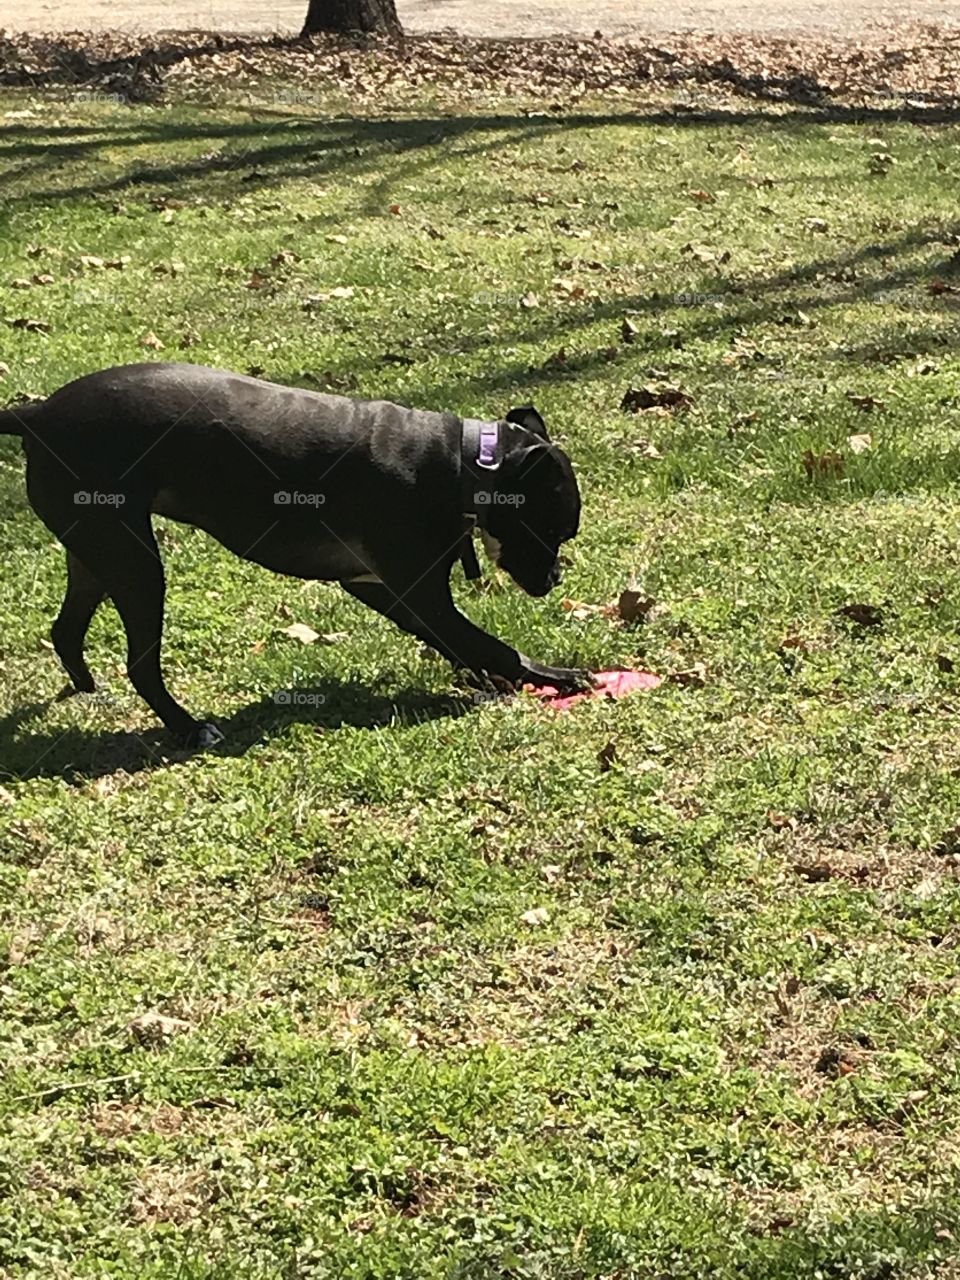 Playing frisbee at the park